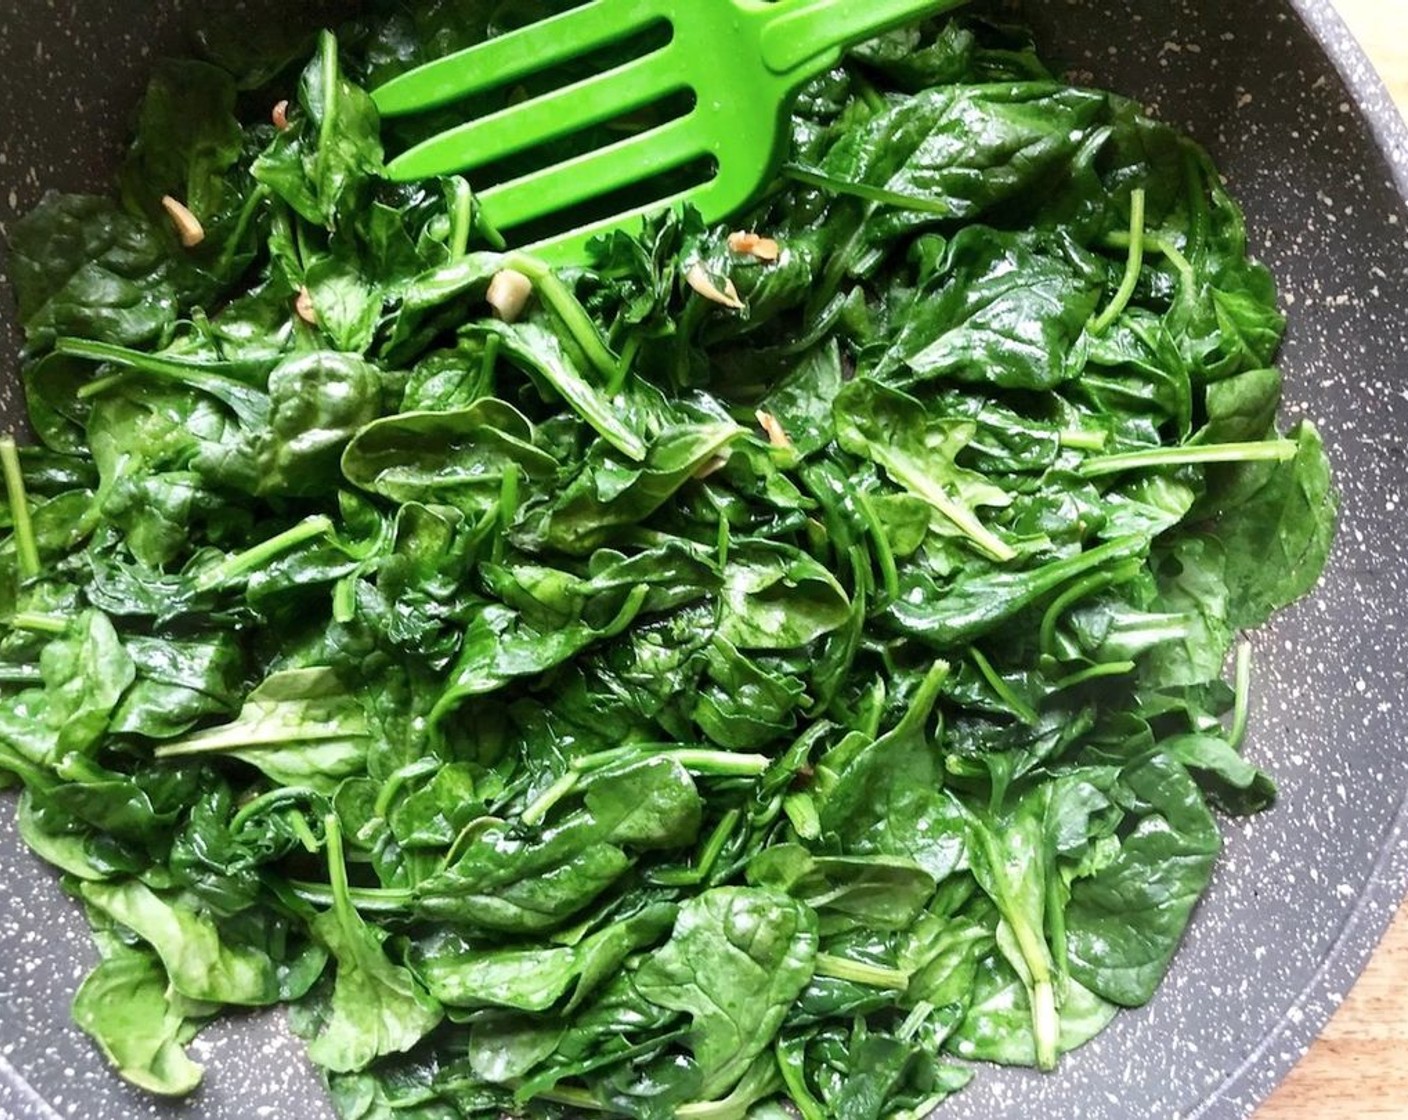 step 6 Add the Fresh Baby Spinach (8 cups) and stir in the remaining Kosher Salt (1/8 tsp). Cook just until the spinach is wilted. Stir in the 2 Tbsp of lemon juice.